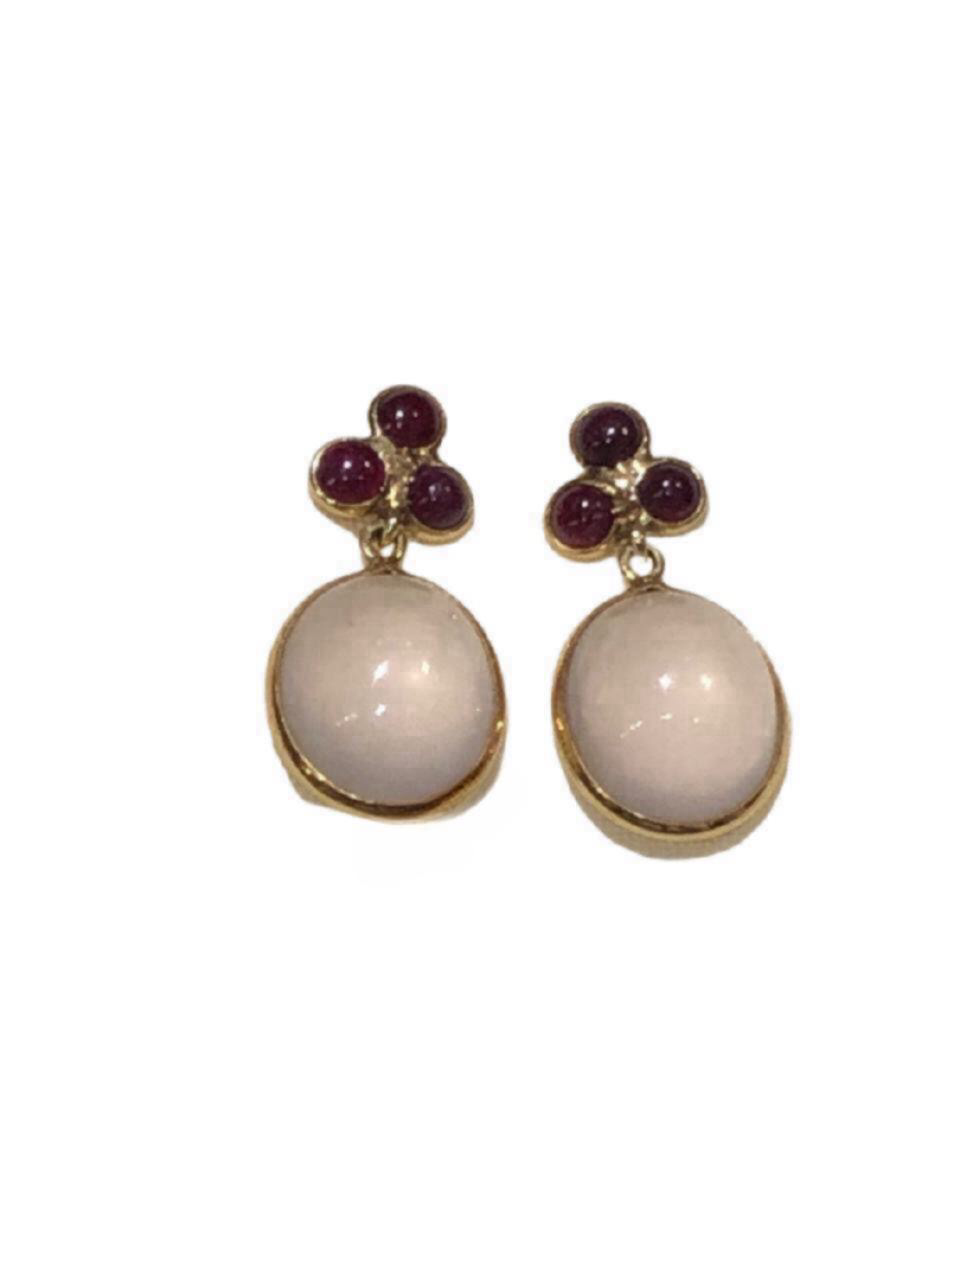 Natural Rose Quartz And Ruby Earrings in 18k Pure Gold